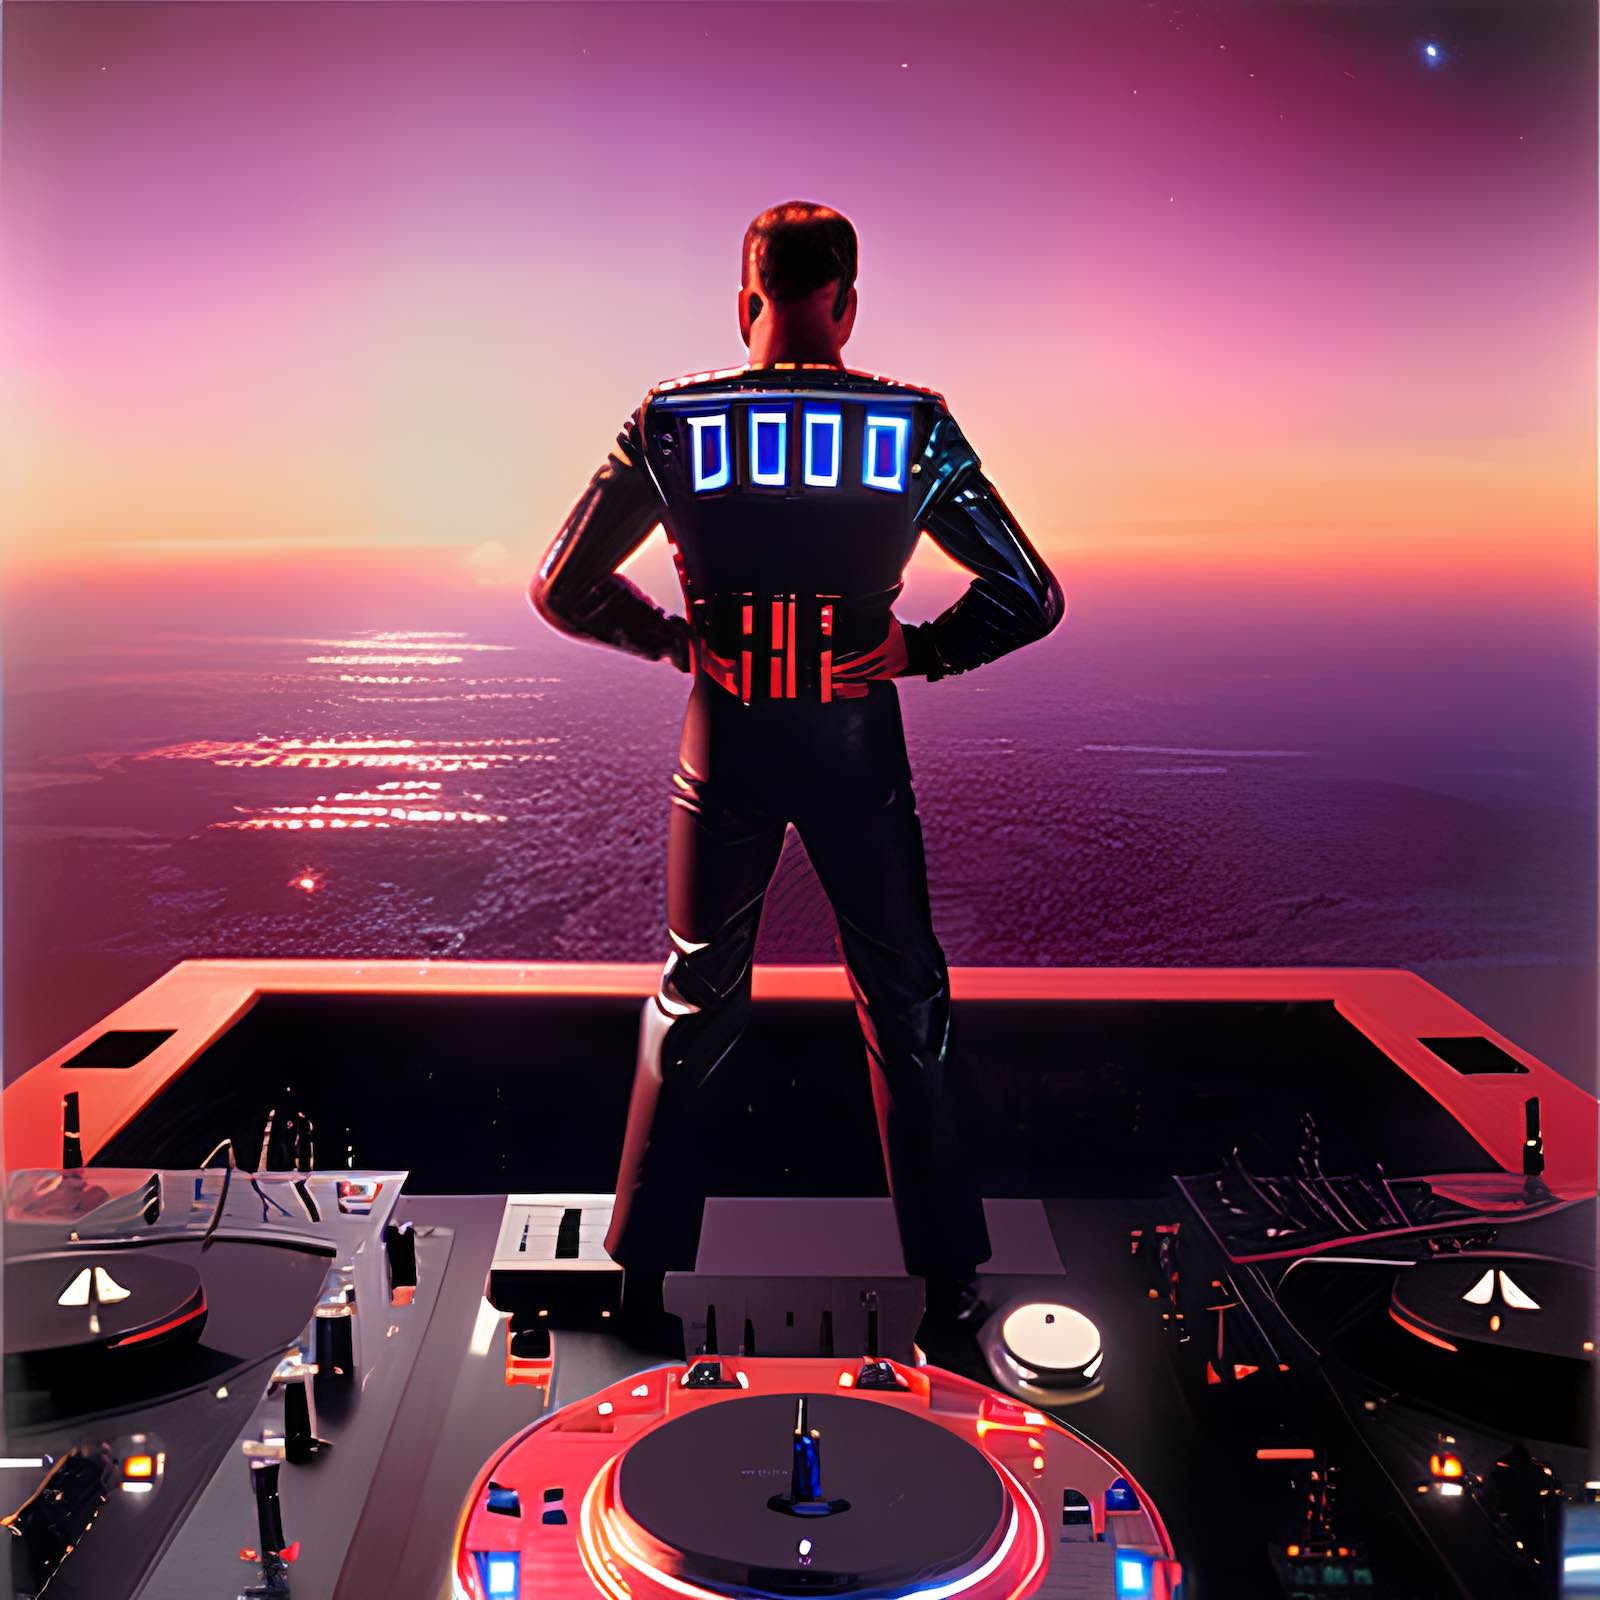 What Will Djing Look Like In The Future? Some things will never change, like the cheesy DJ pose. And no audience.